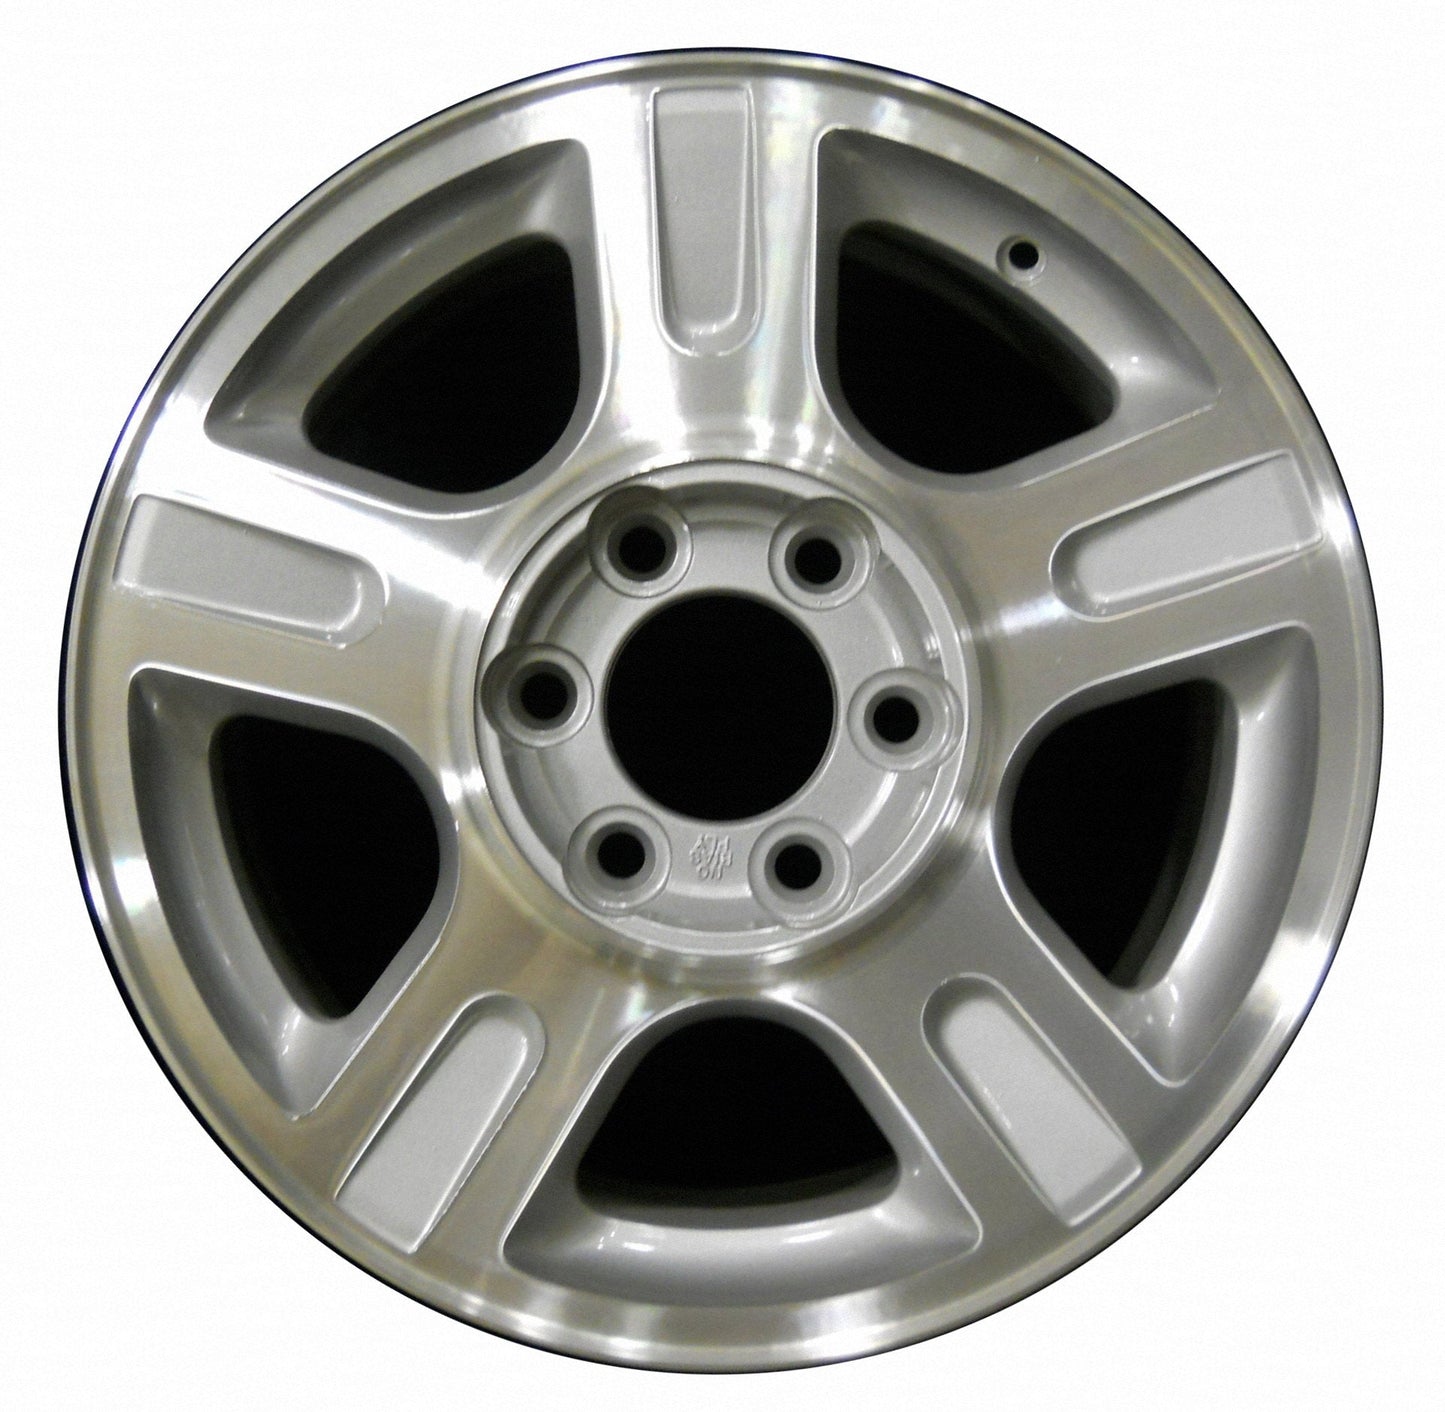 Ford Expedition  2003, 2004, 2005, 2006 Factory OEM Car Wheel Size 17x7.5 Alloy WAO.3516.PS02.MA